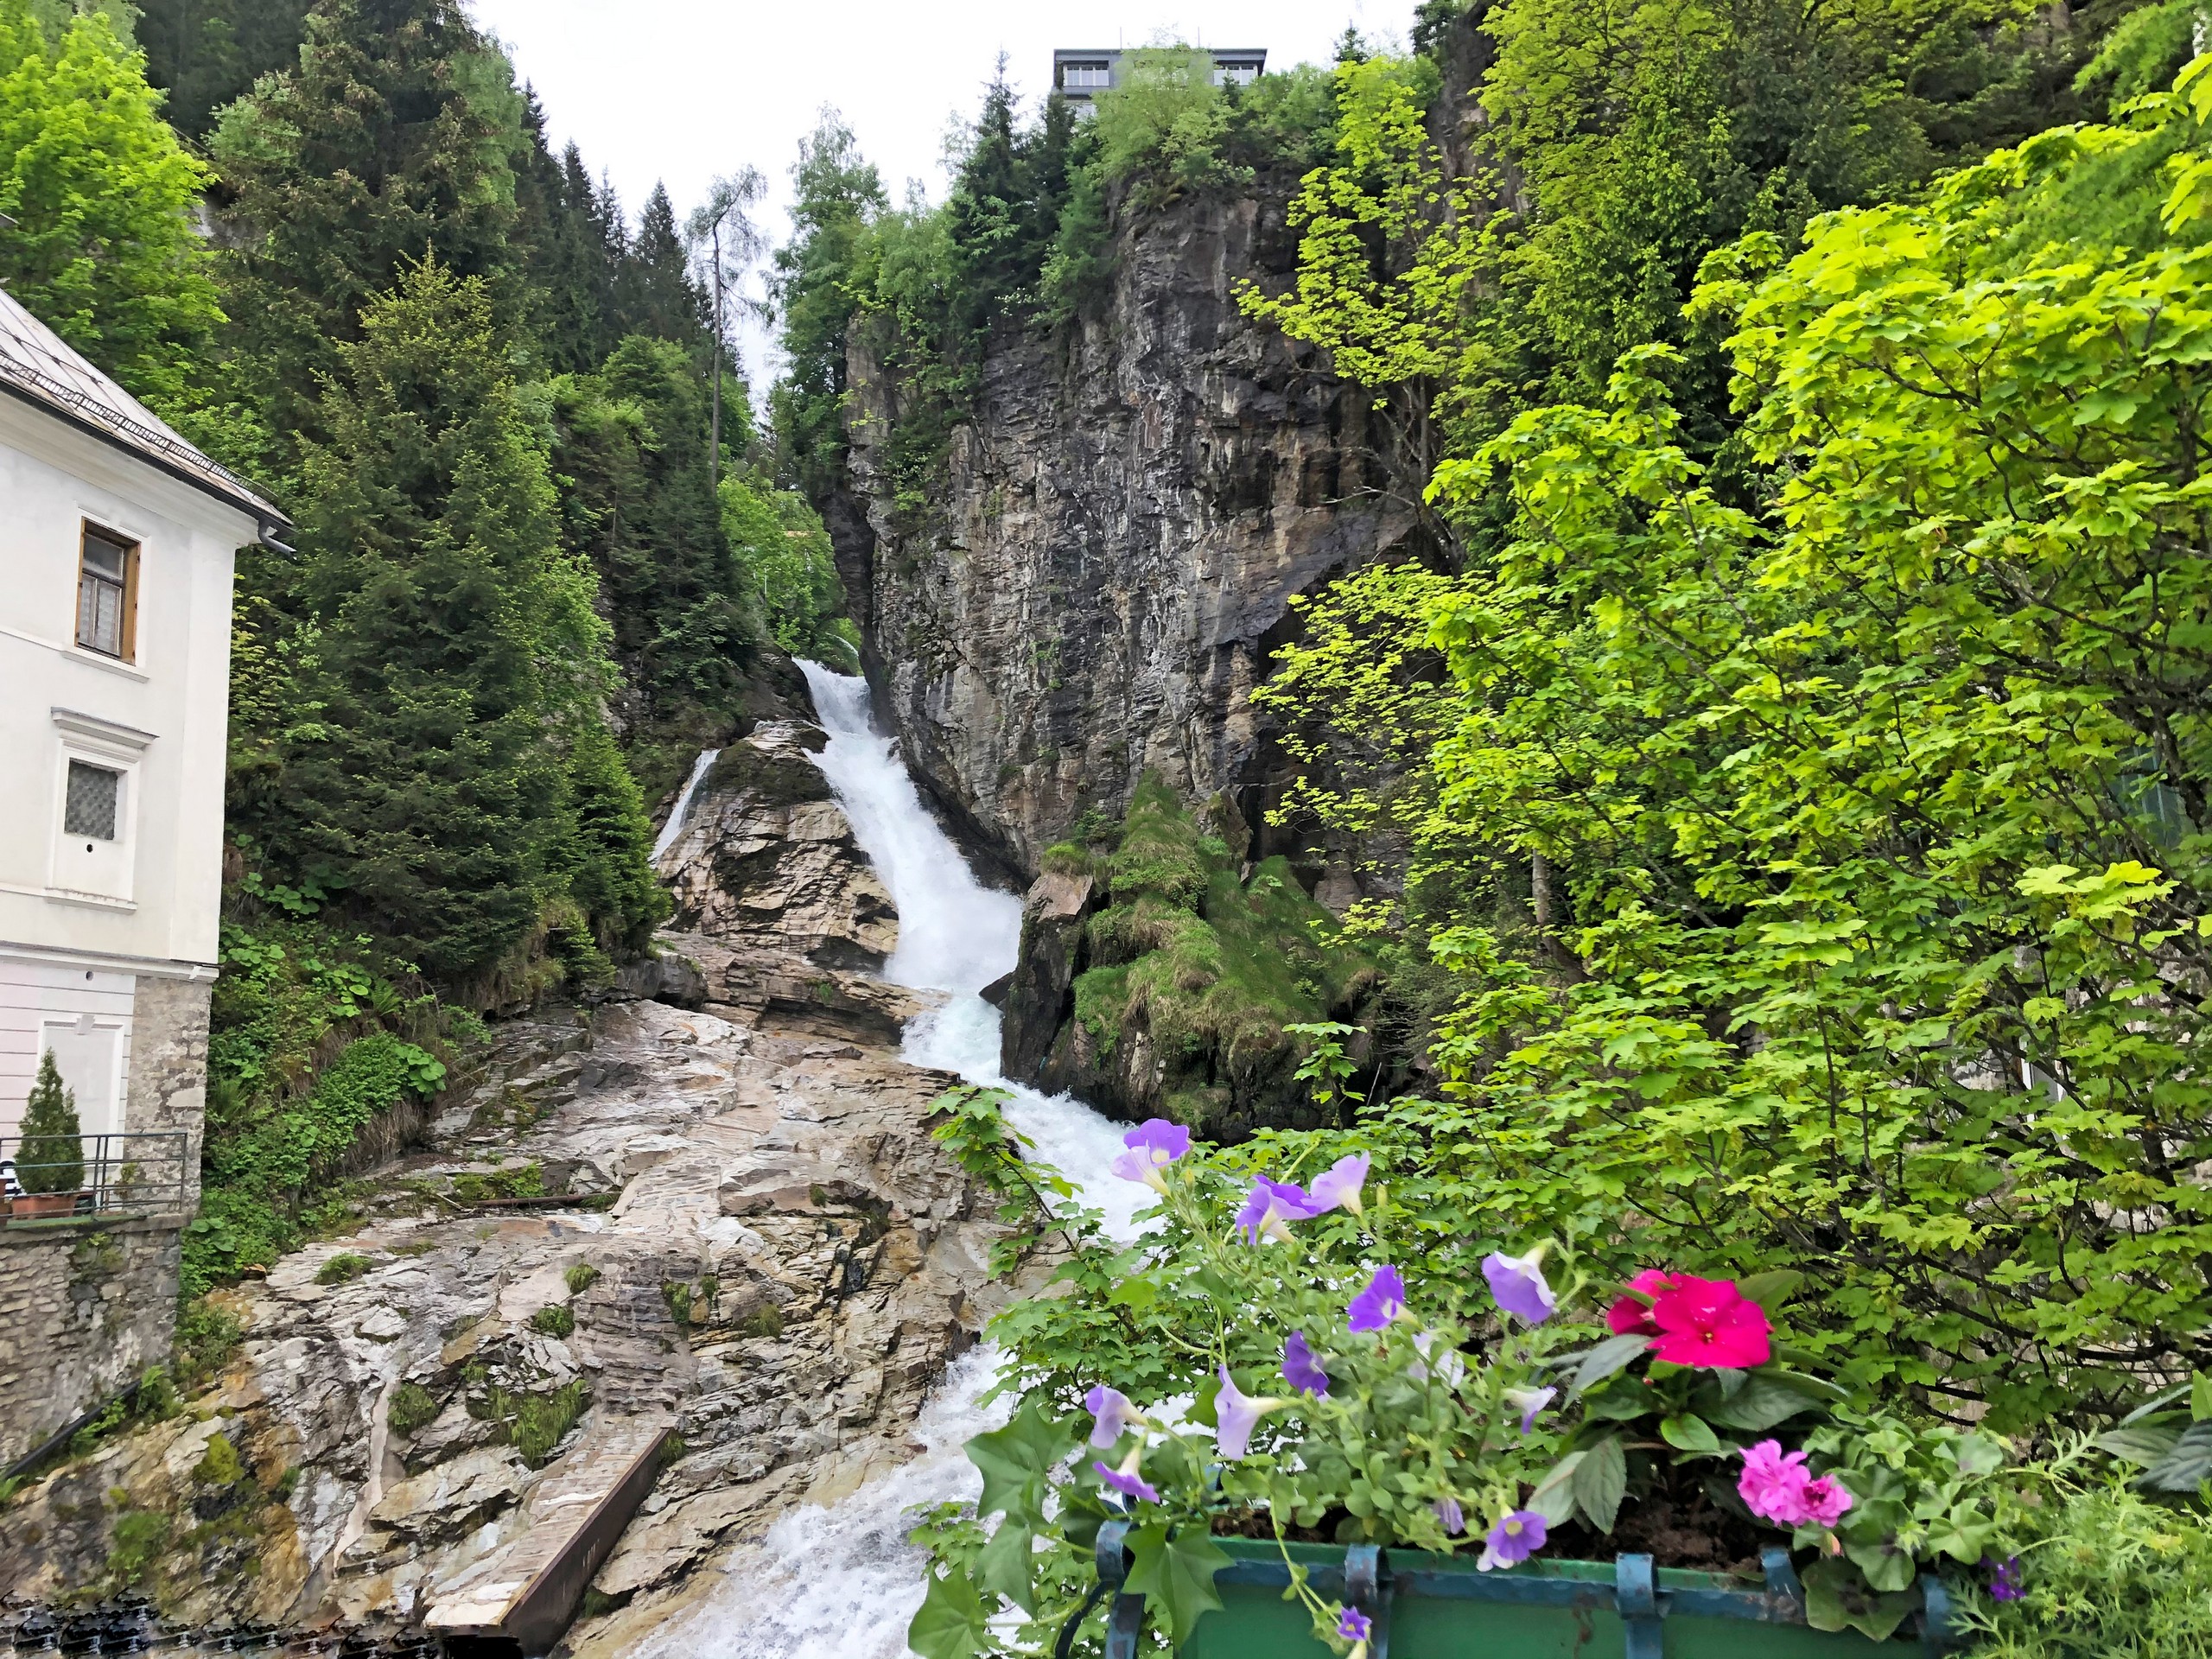 Small waterfall along the Alpe Adria route